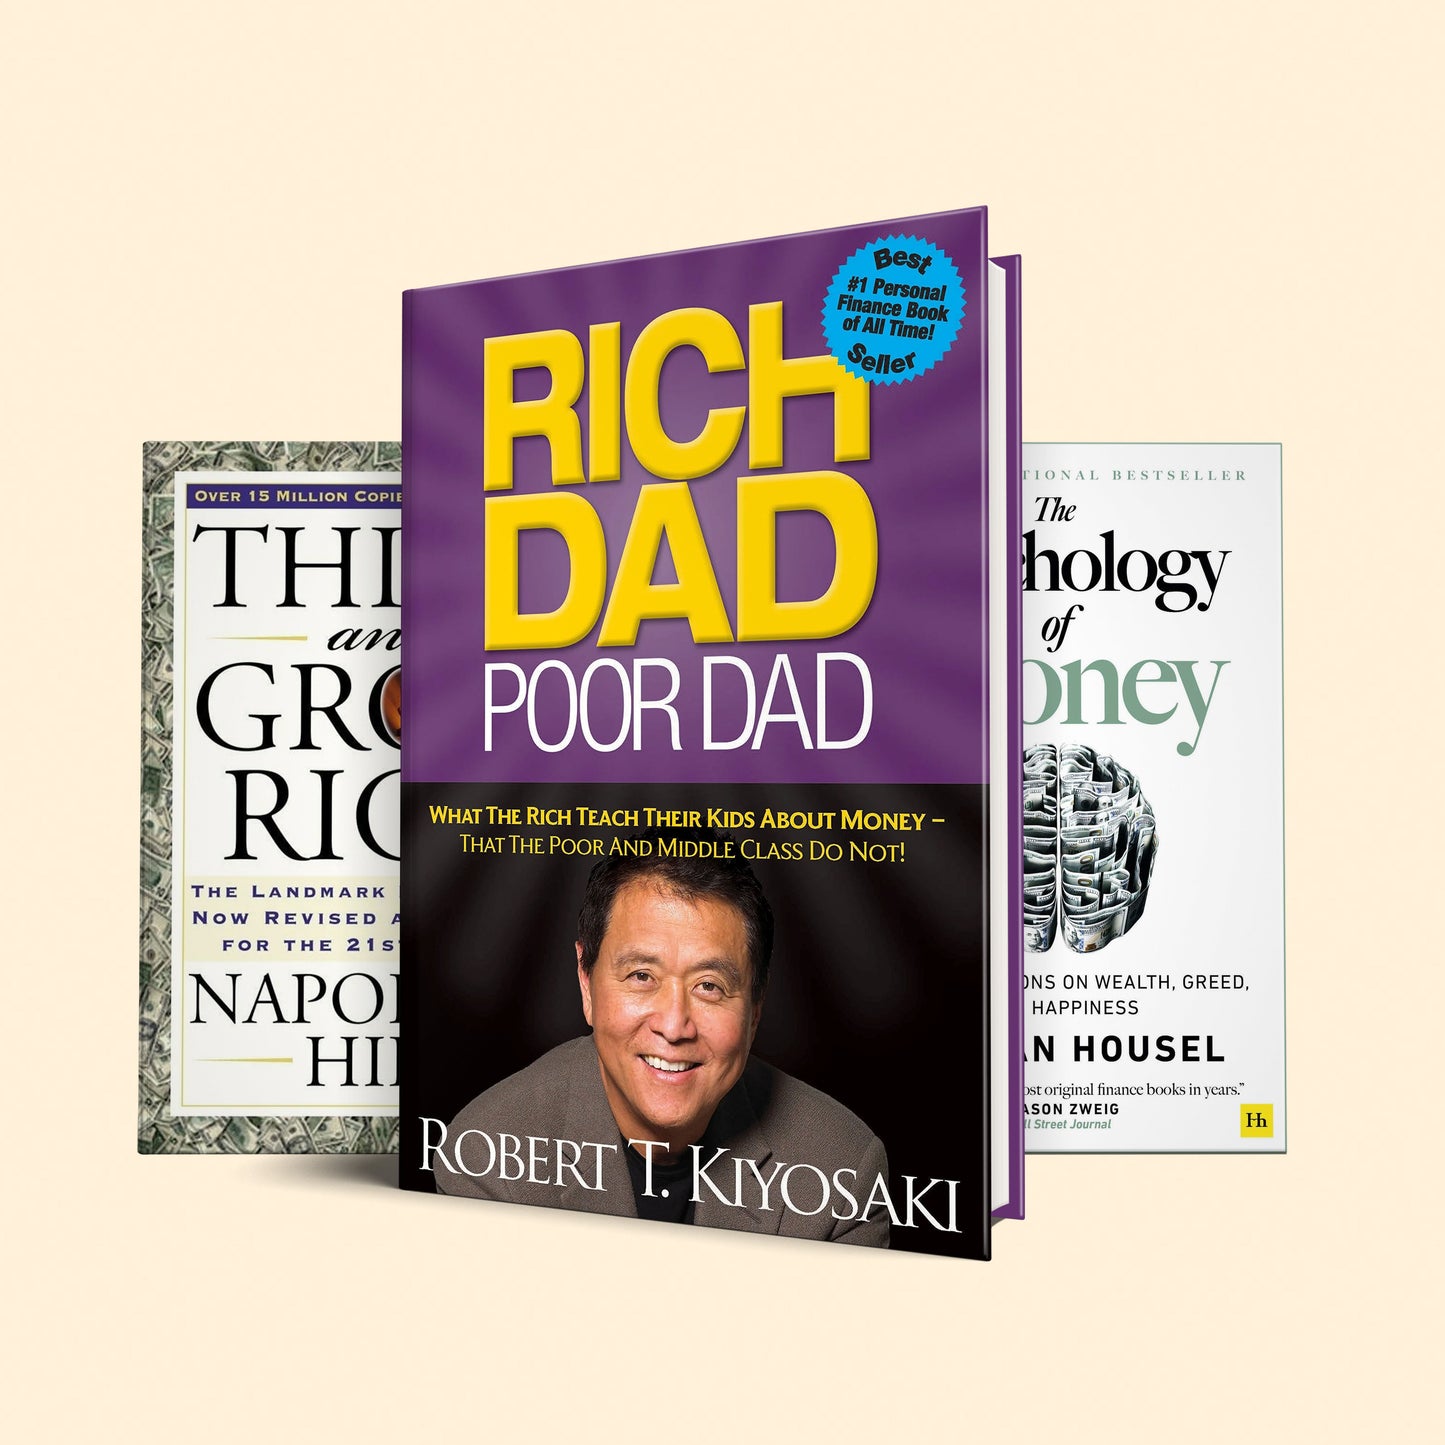 Fix your mindset & start thinking like rich people do: "Rich dad poor dad, psychology of money, think and grow rich